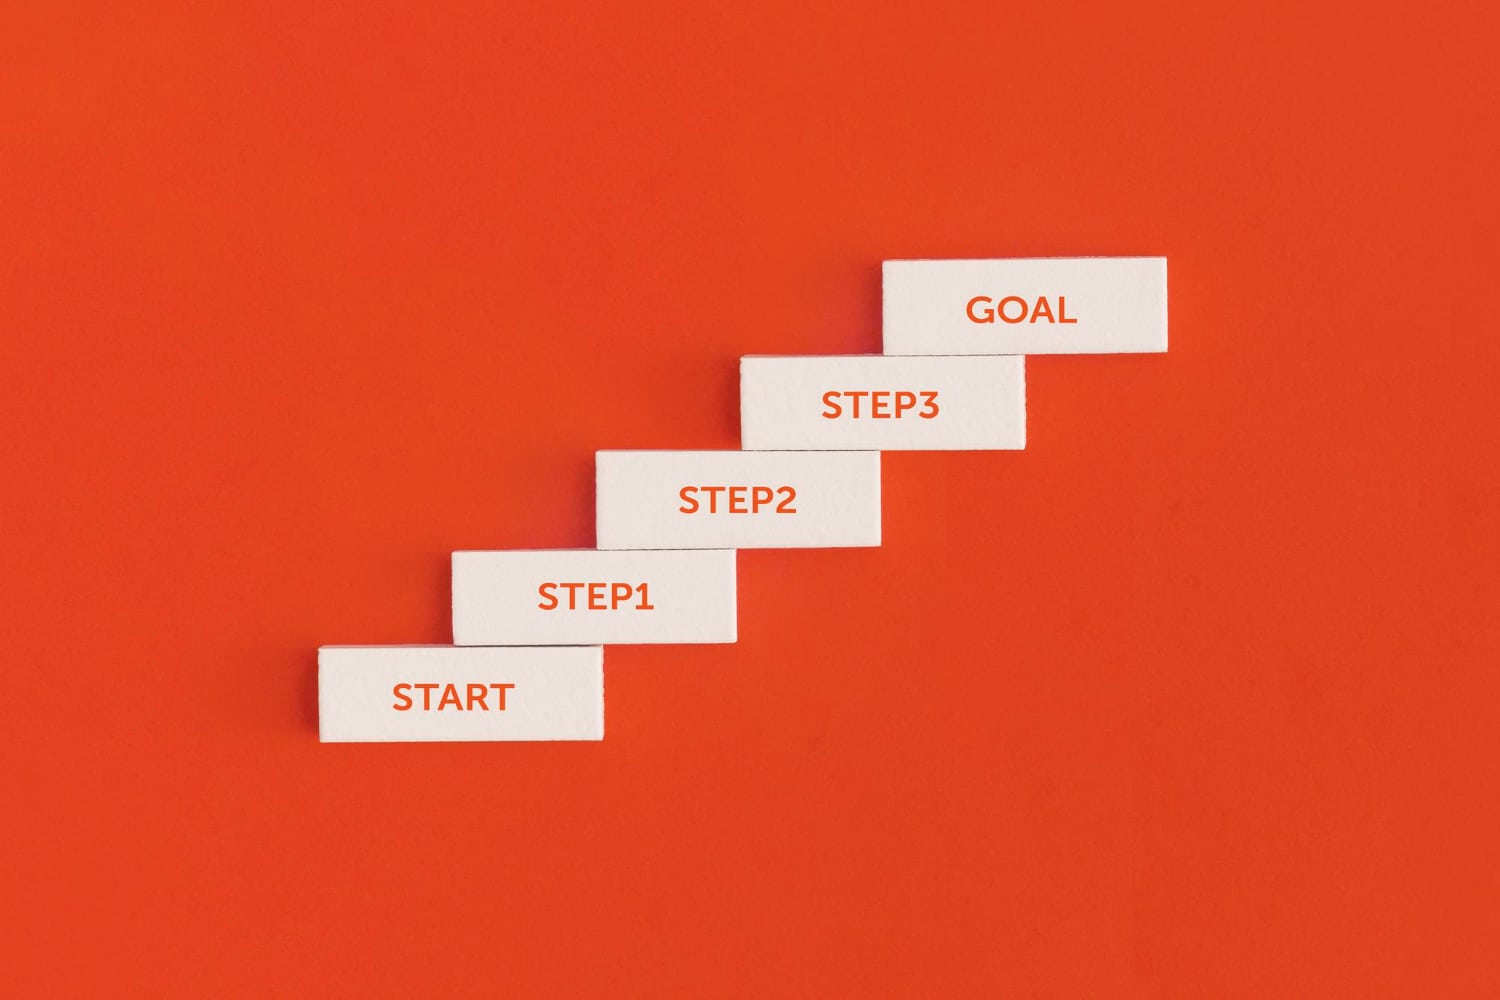 An Illustration On A Red Background That Shows Steps And Goals